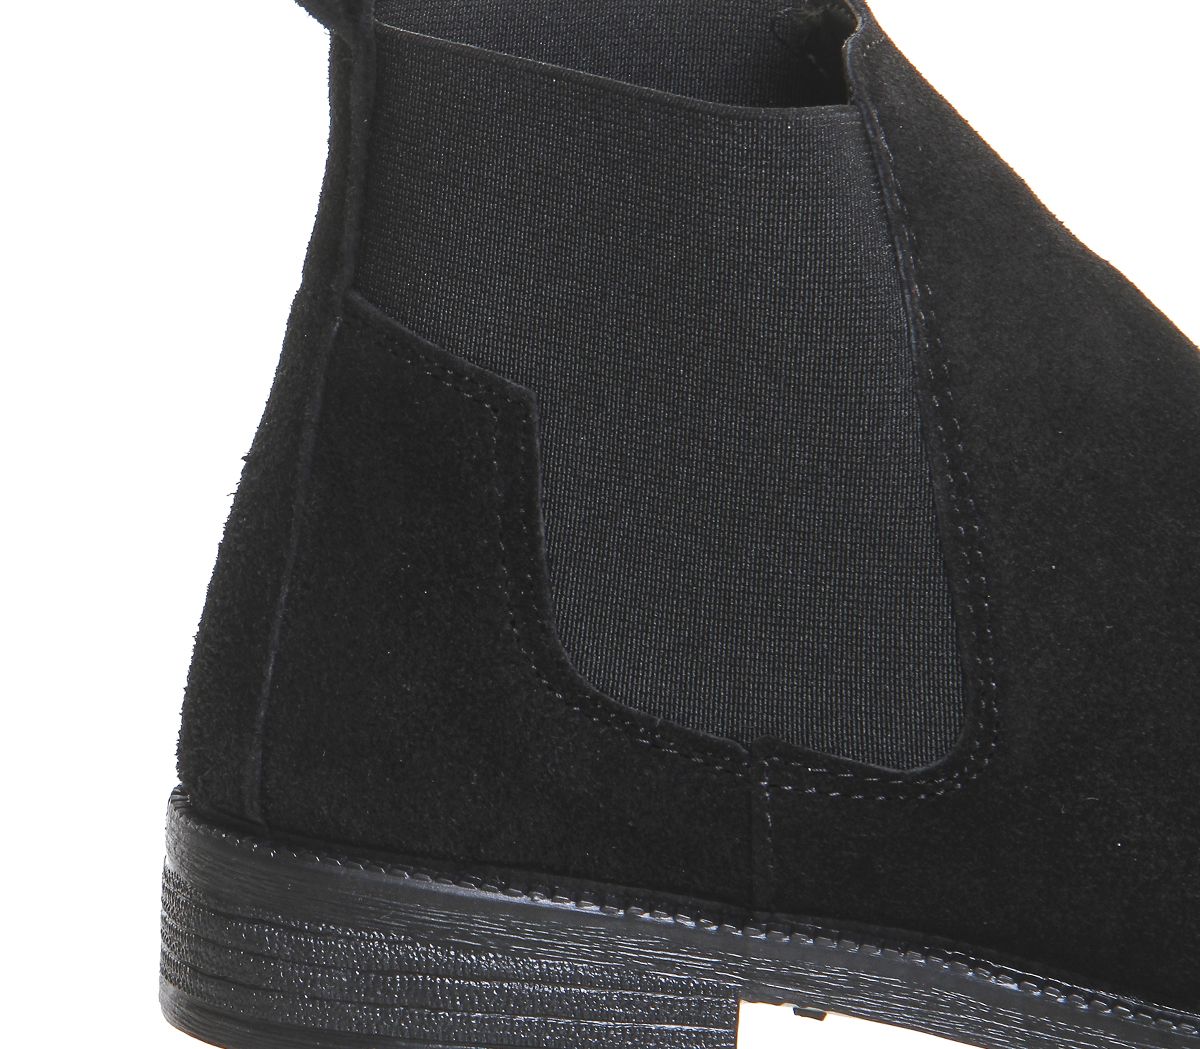 Office Jamie Chelsea Boots Black Suede - Ankle Boots